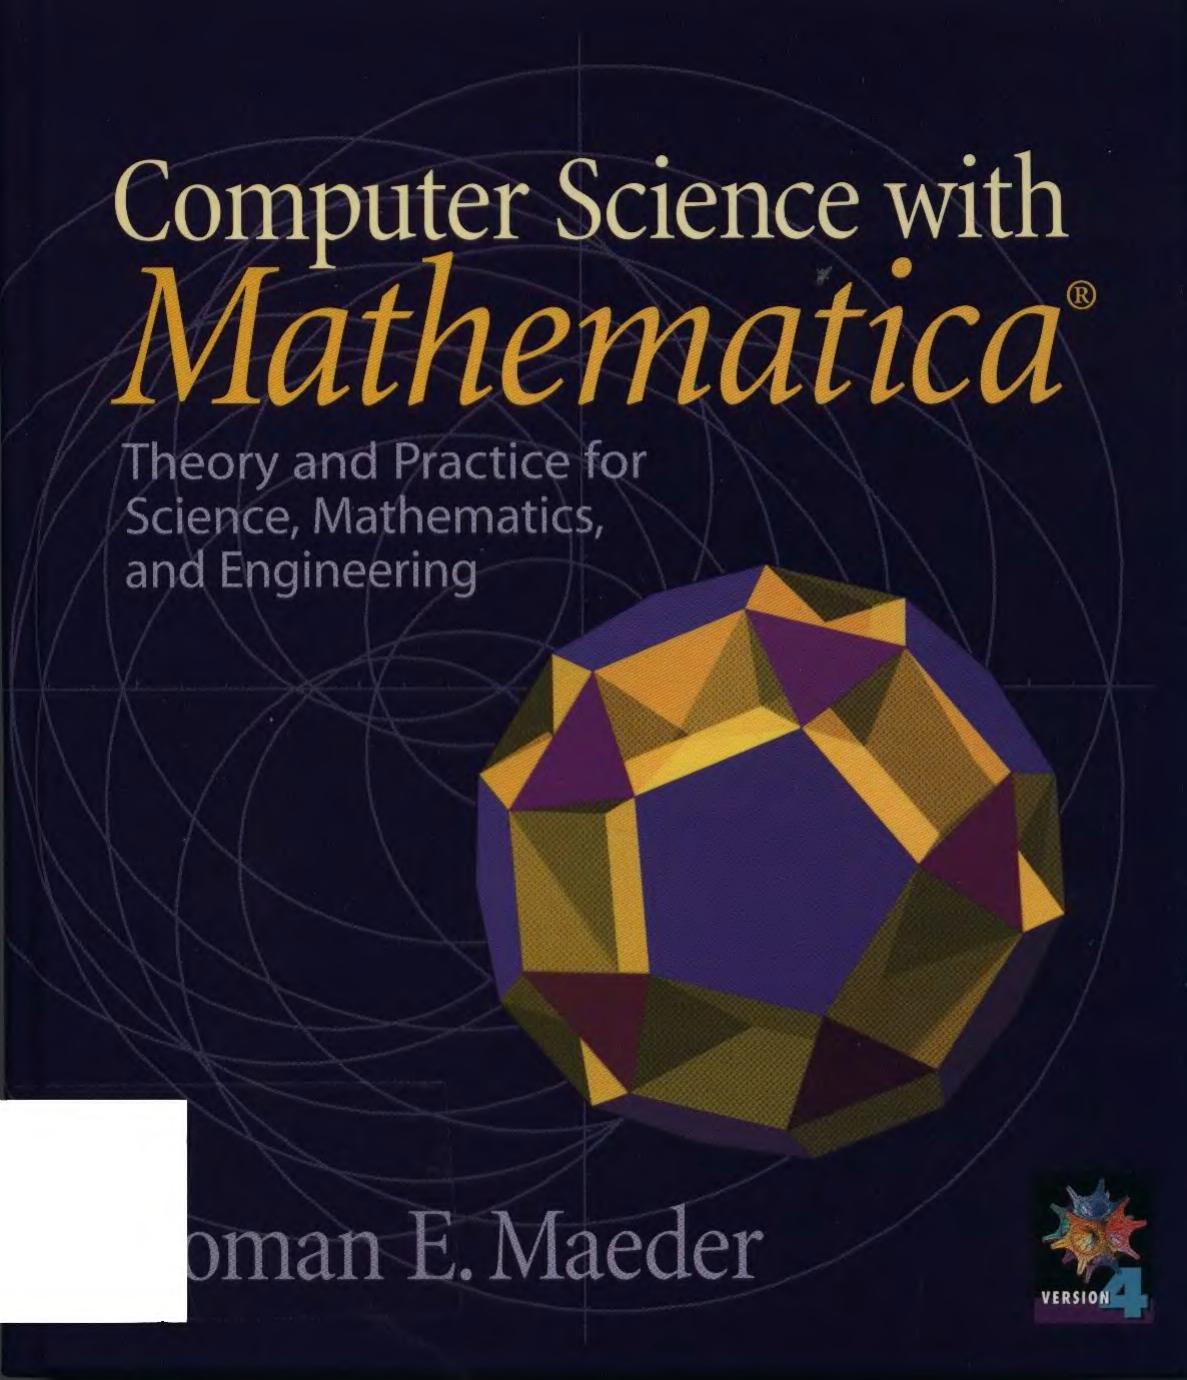 Computer Science with Mathematica®: Theory and Practice for Science, Mathematics, and Engineering